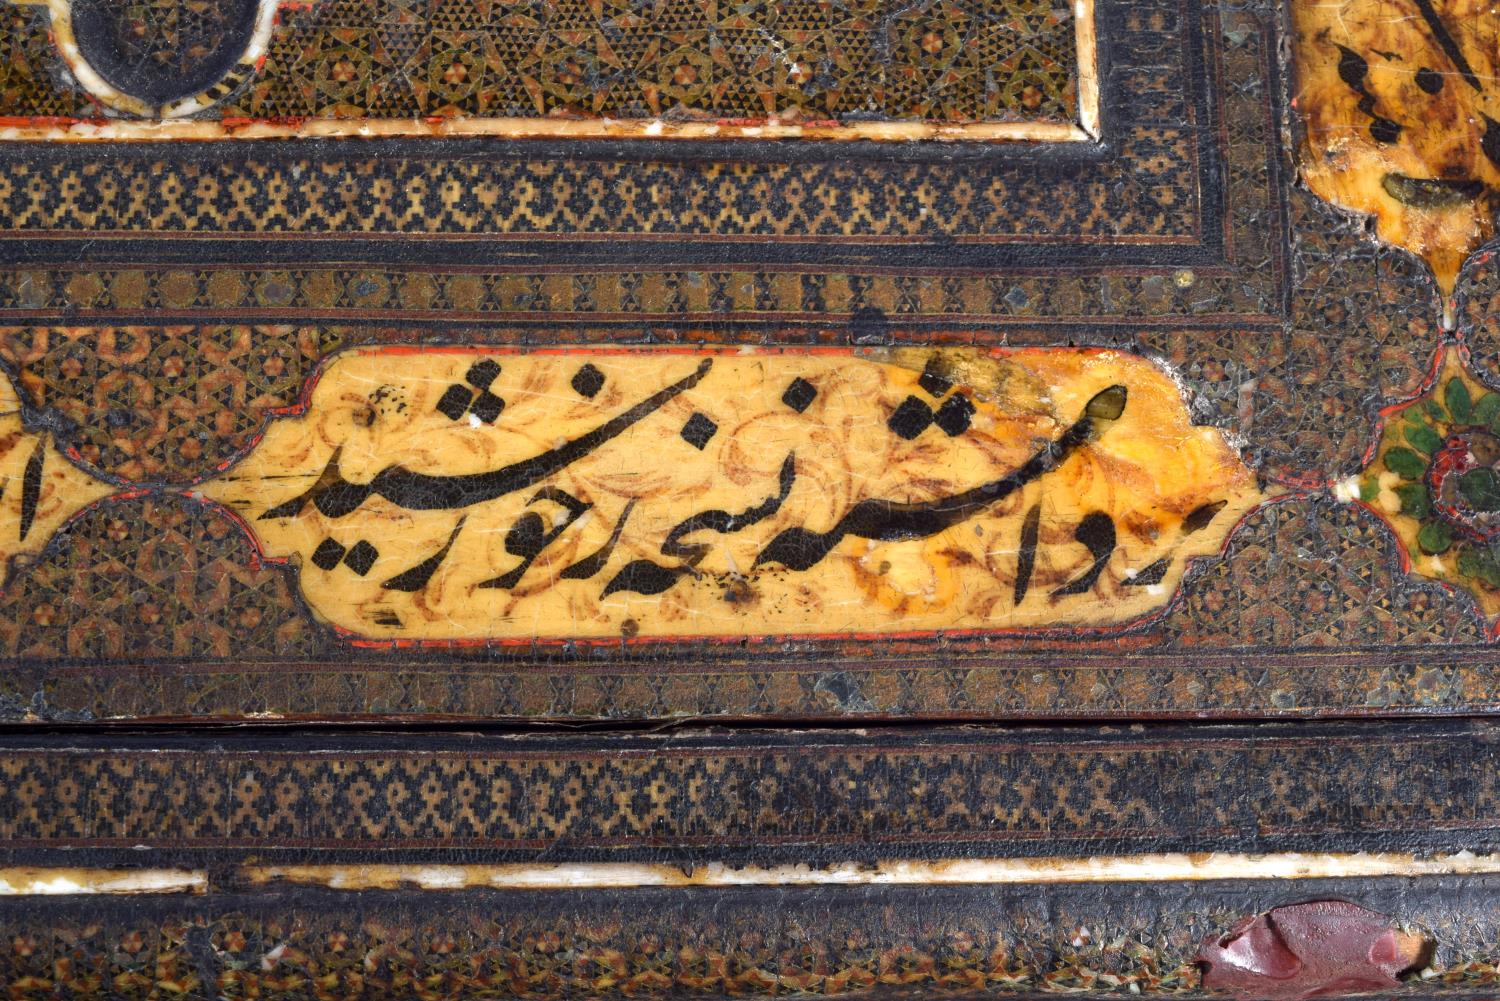 A RARE LARGE 18TH/19TH CENTURY MIDDLE EASTERN ISLAMIC MICRO MOSAIC BOX painted with Kufic script, fo - Image 7 of 8